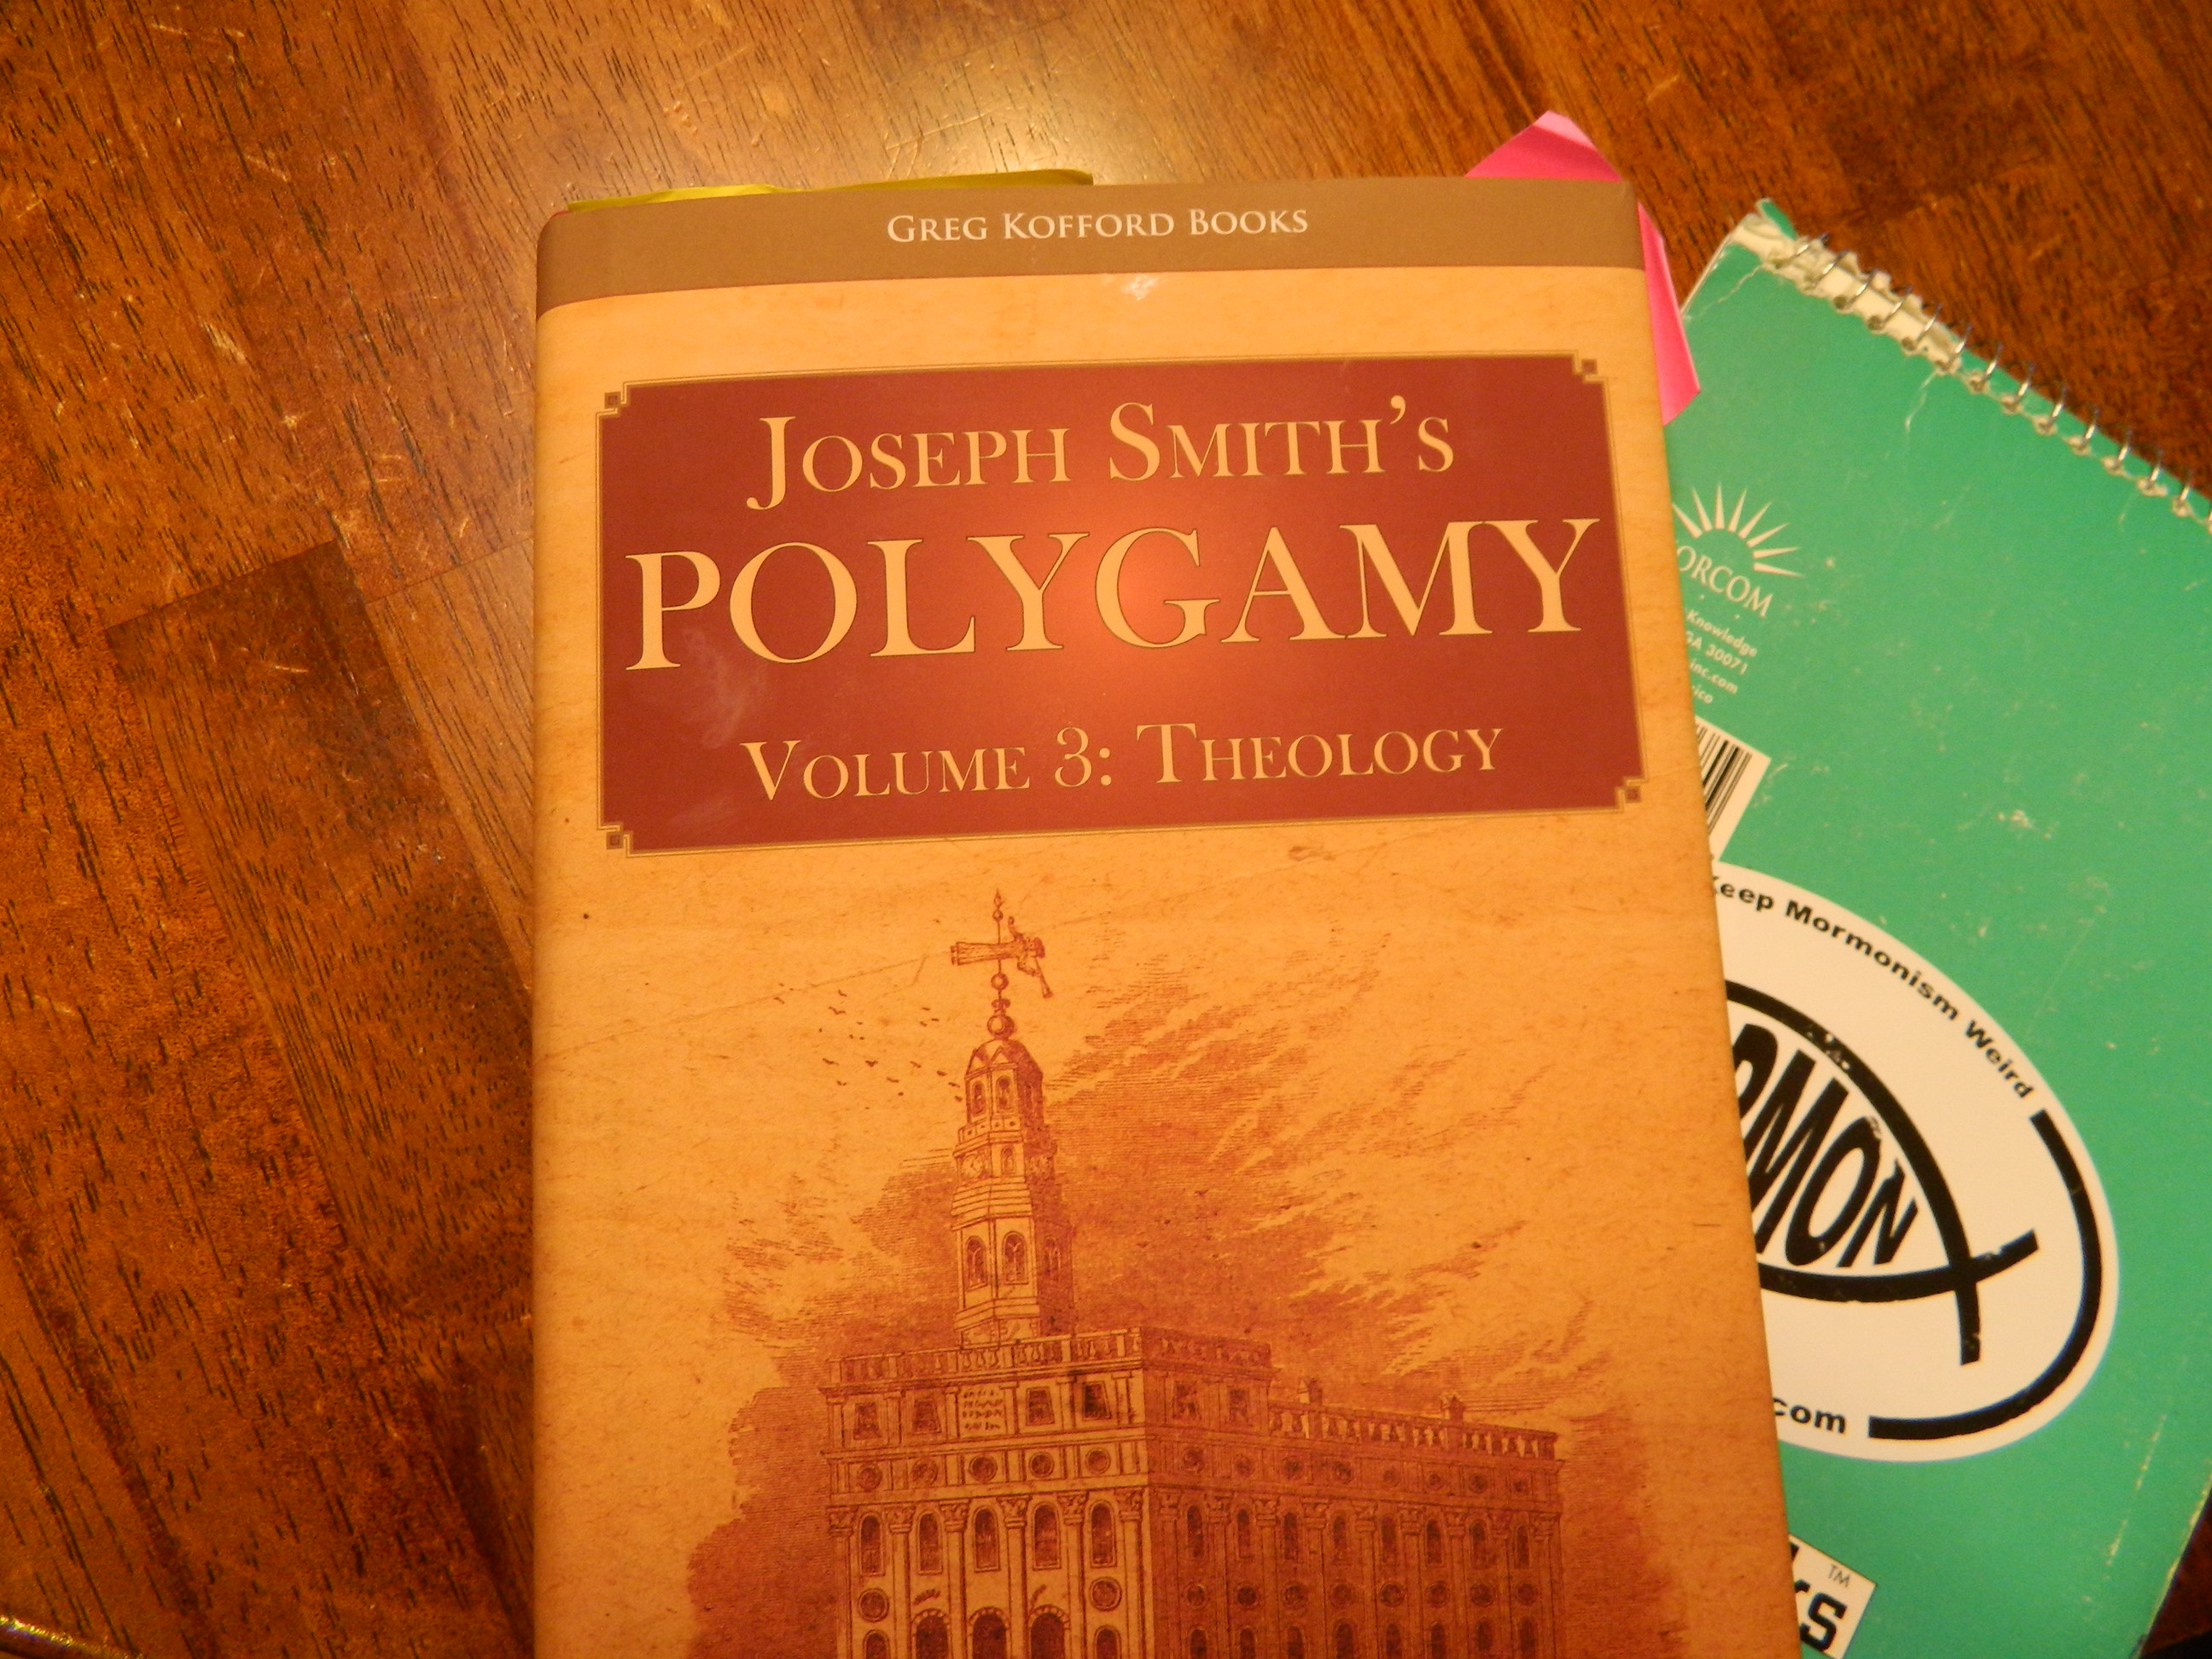 JOSEPH SMITH’S POLYGAMY VOLUME 3: THEOLOGY – A BOOK REVIEW